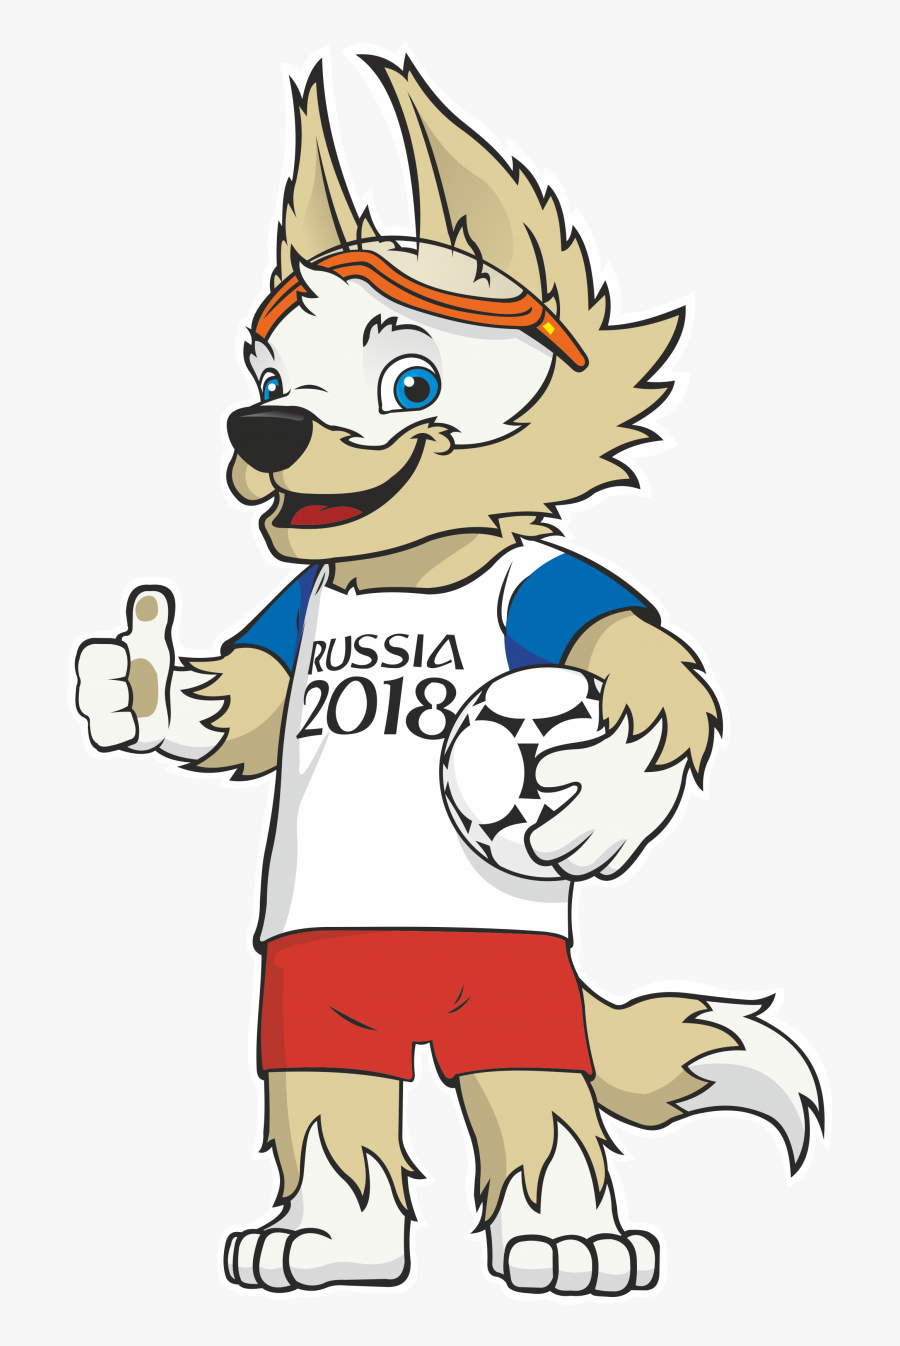 2018 Clipart World Cup - World Cup 2018 Mascot Vector, Transparent Clipart